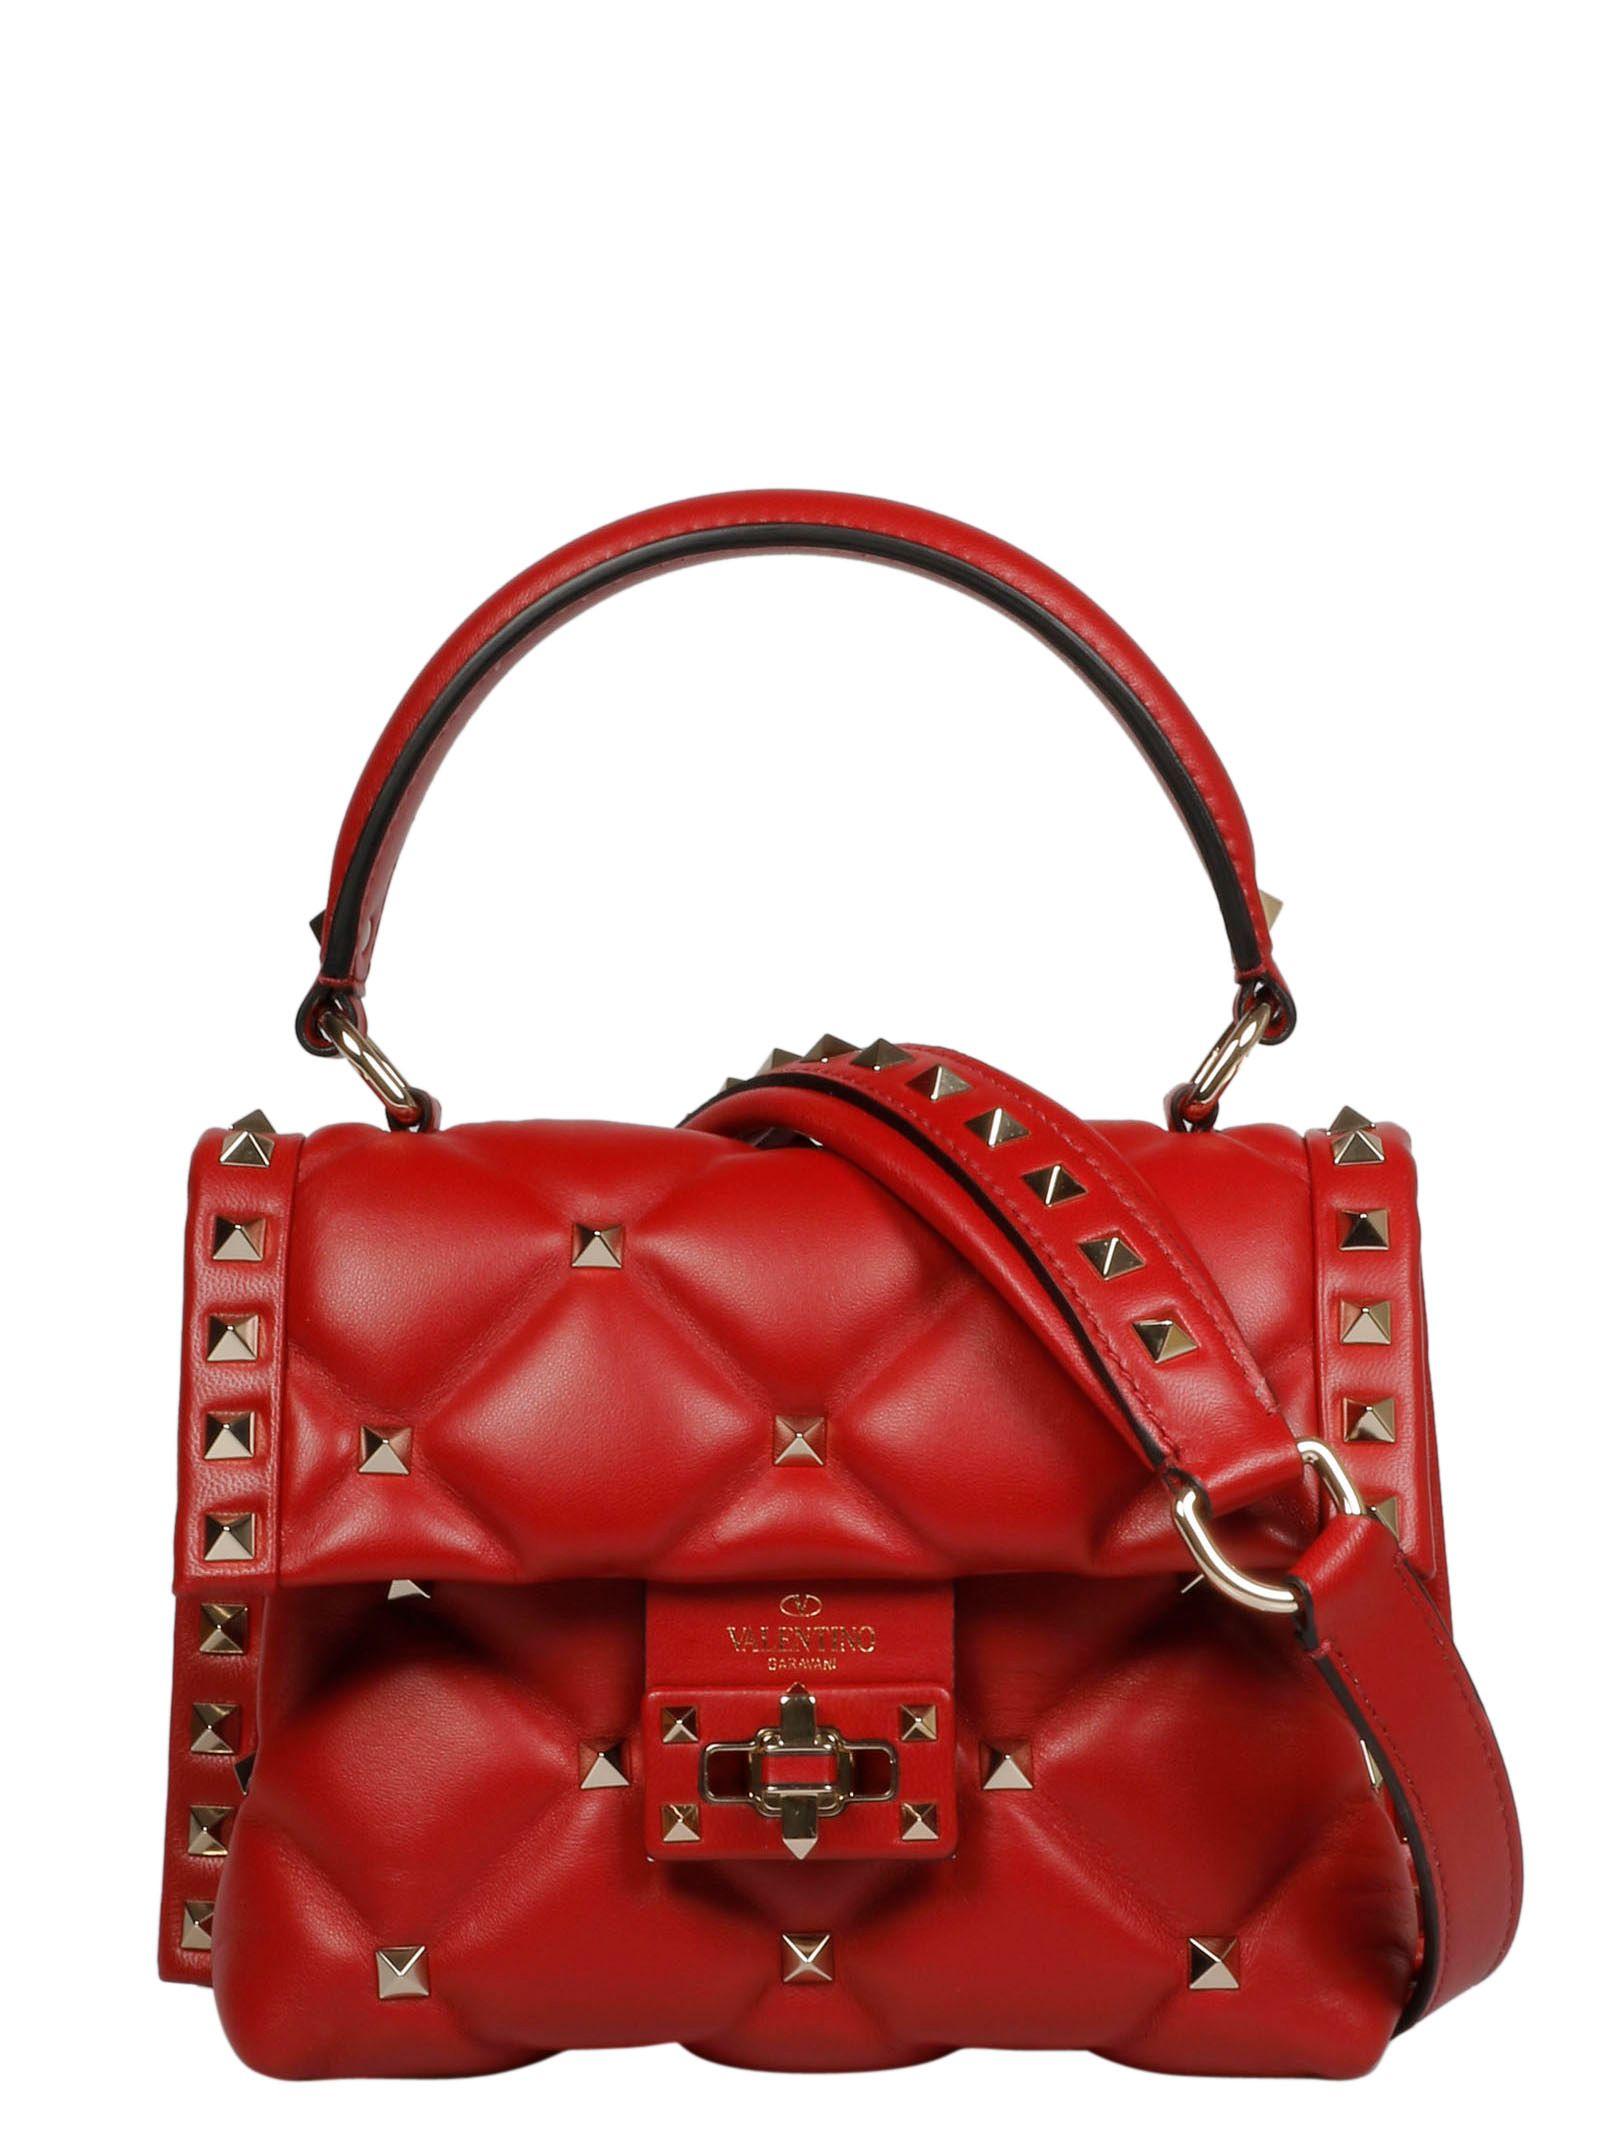 Valentino Red Leather Shoulder Bag in Red - Lyst